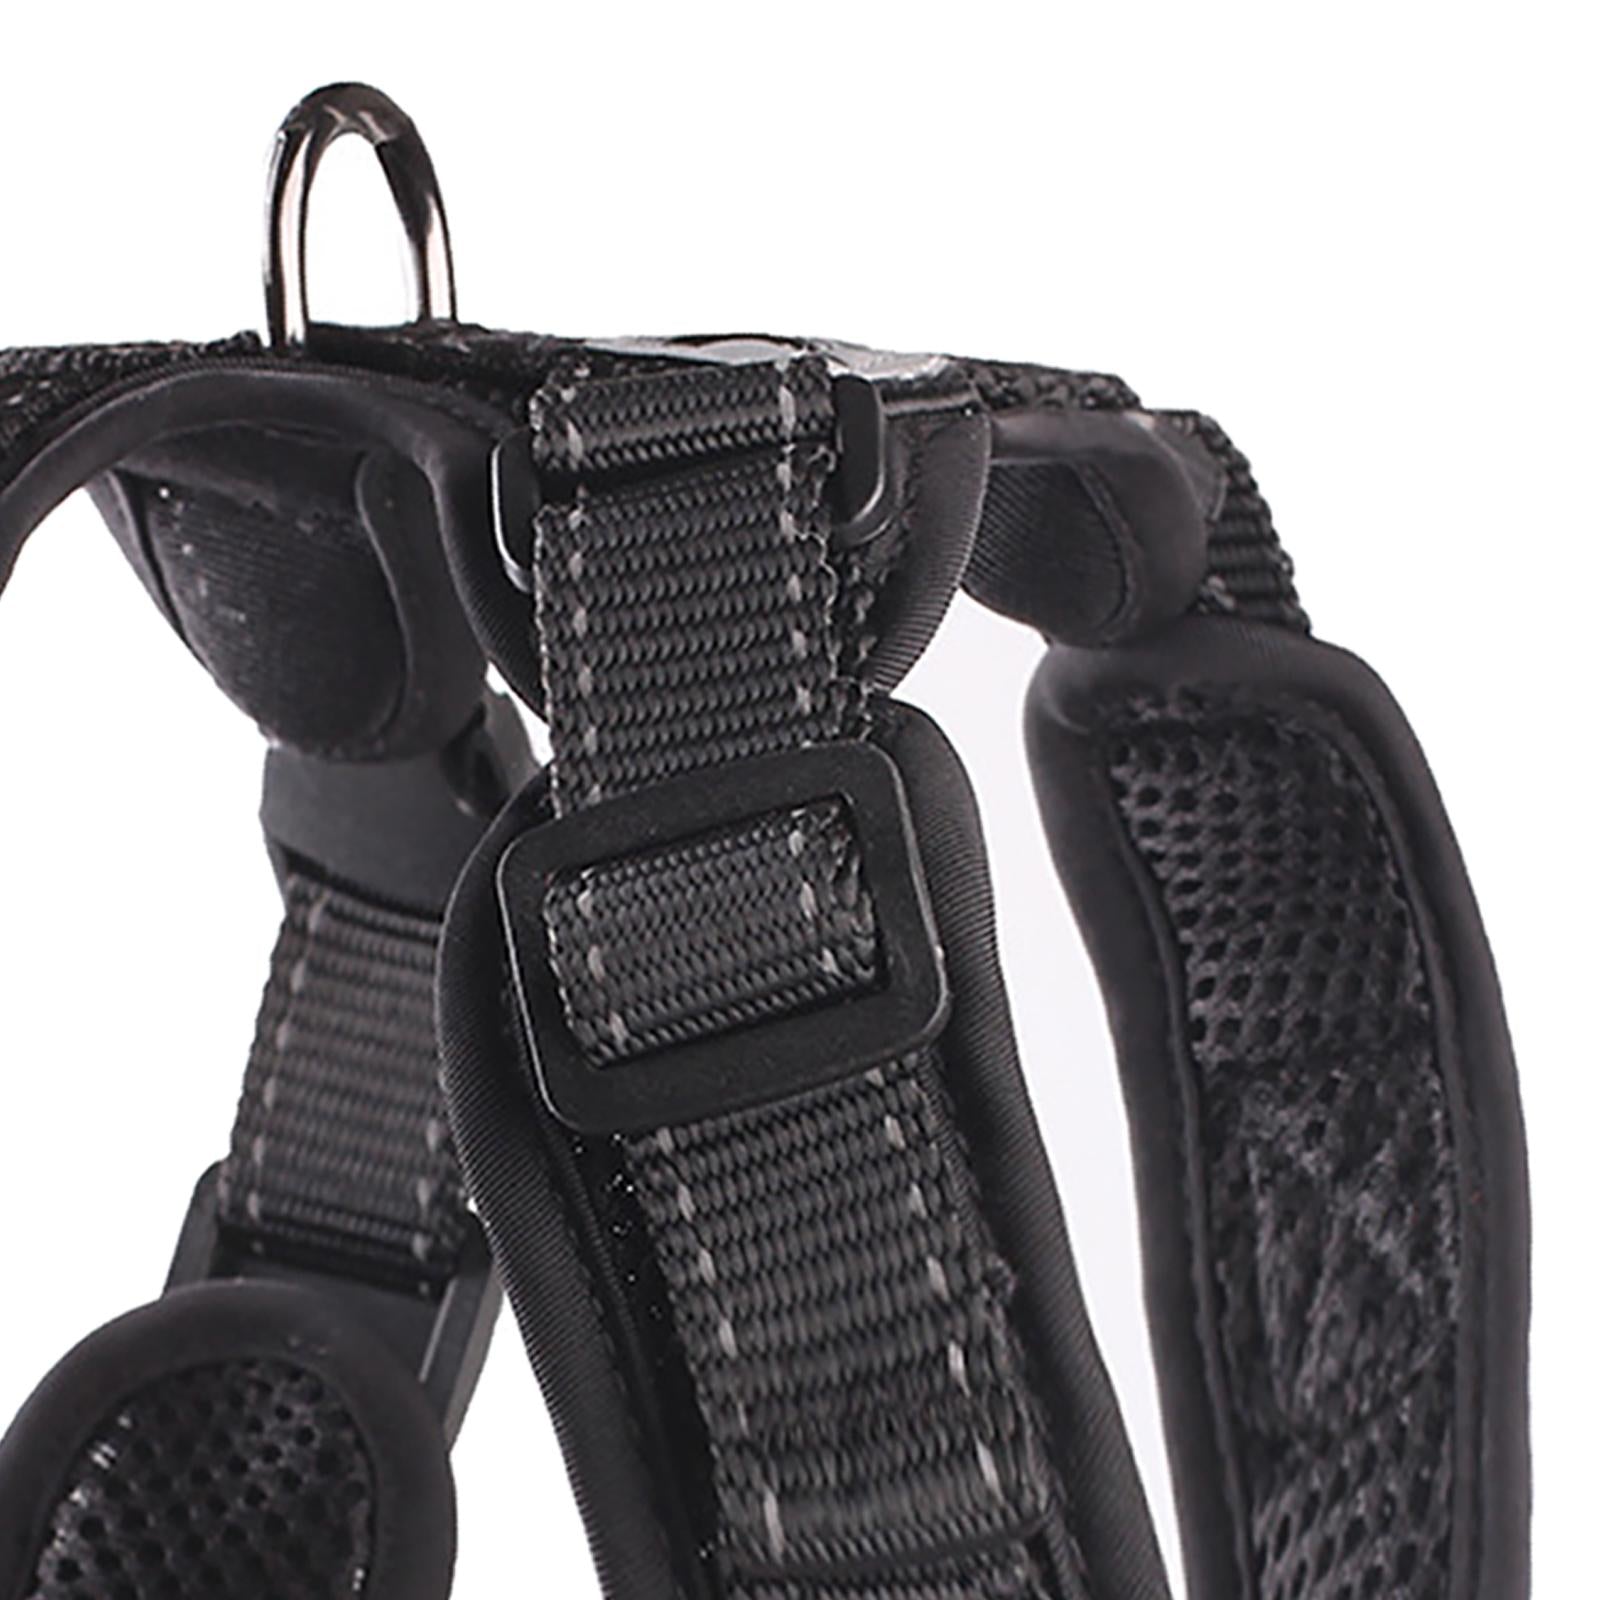 Reflective Dog Harness No Pull Vest Rope for Running Outdoor Lead Walking Black L